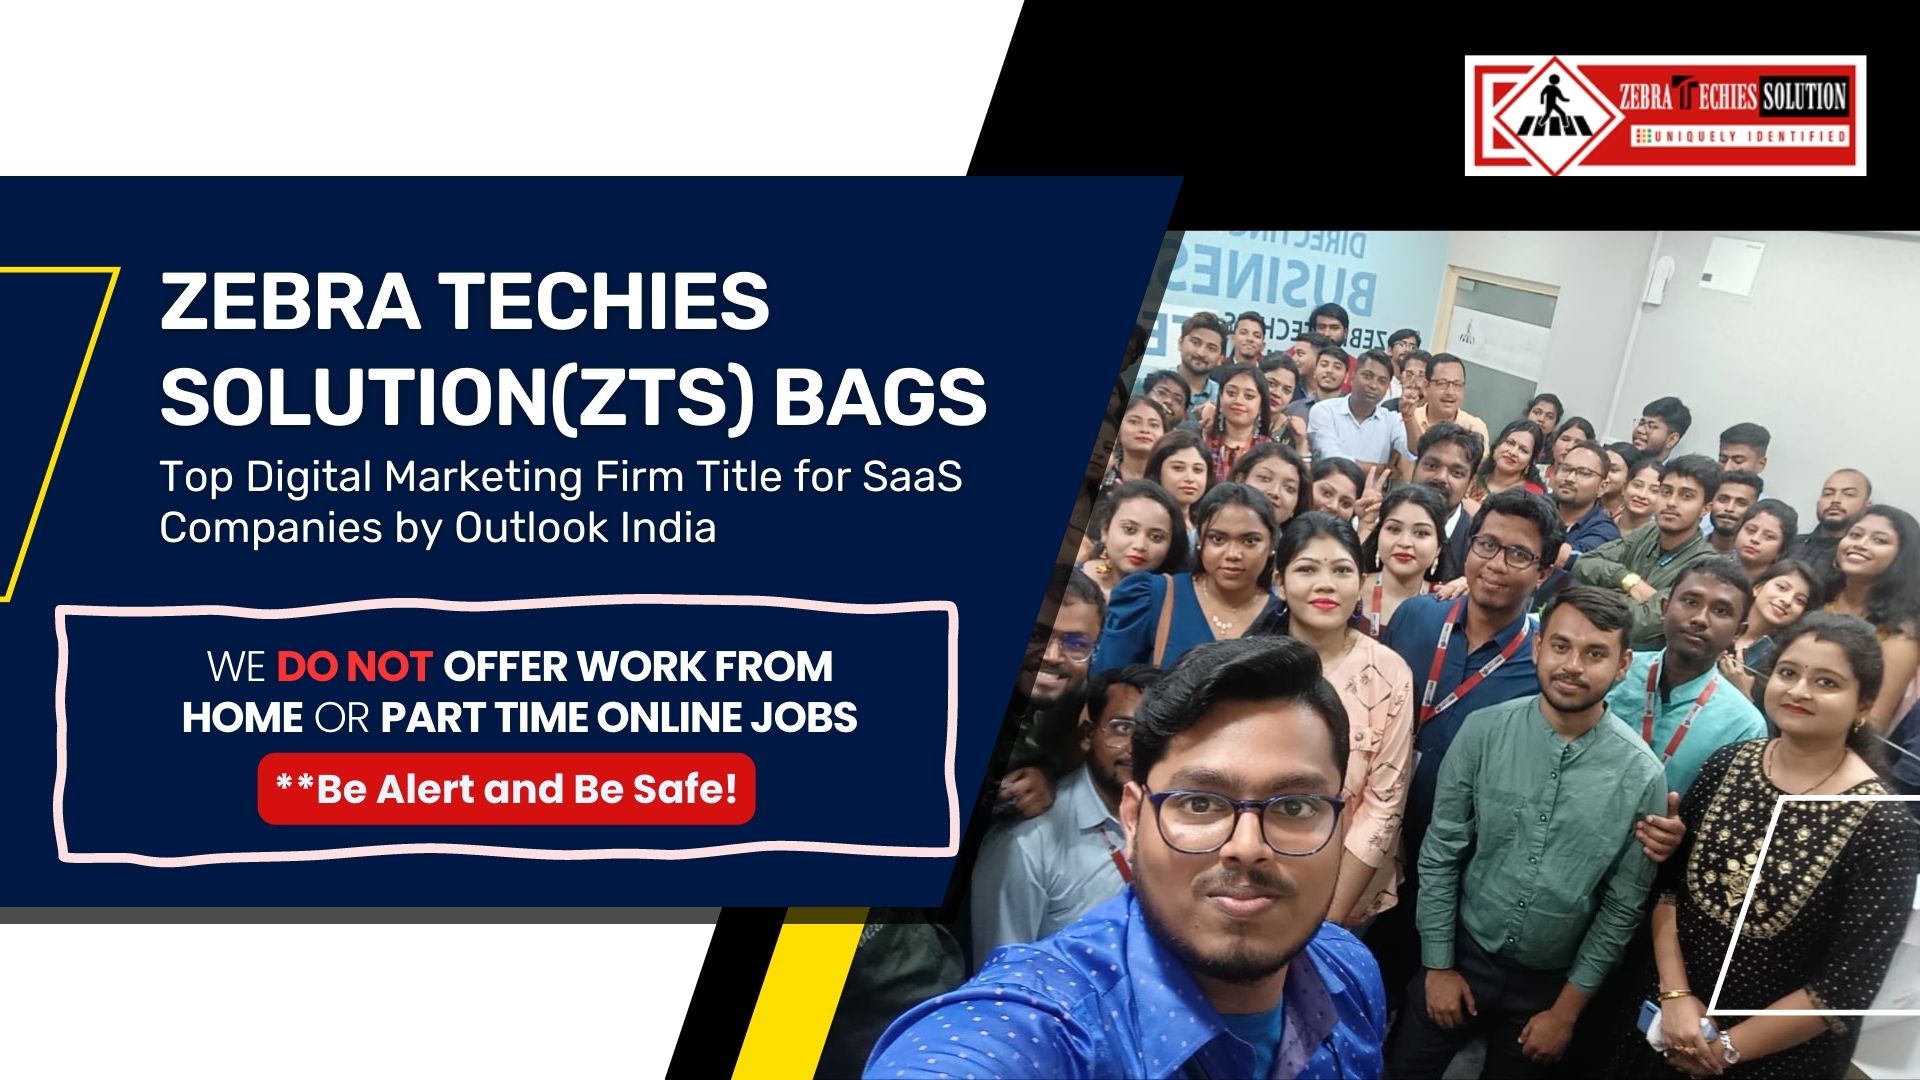 Zebra Techies Solution-ZTS given the title for Digital Marketing Firm Title for SaaS Company by Outlook India